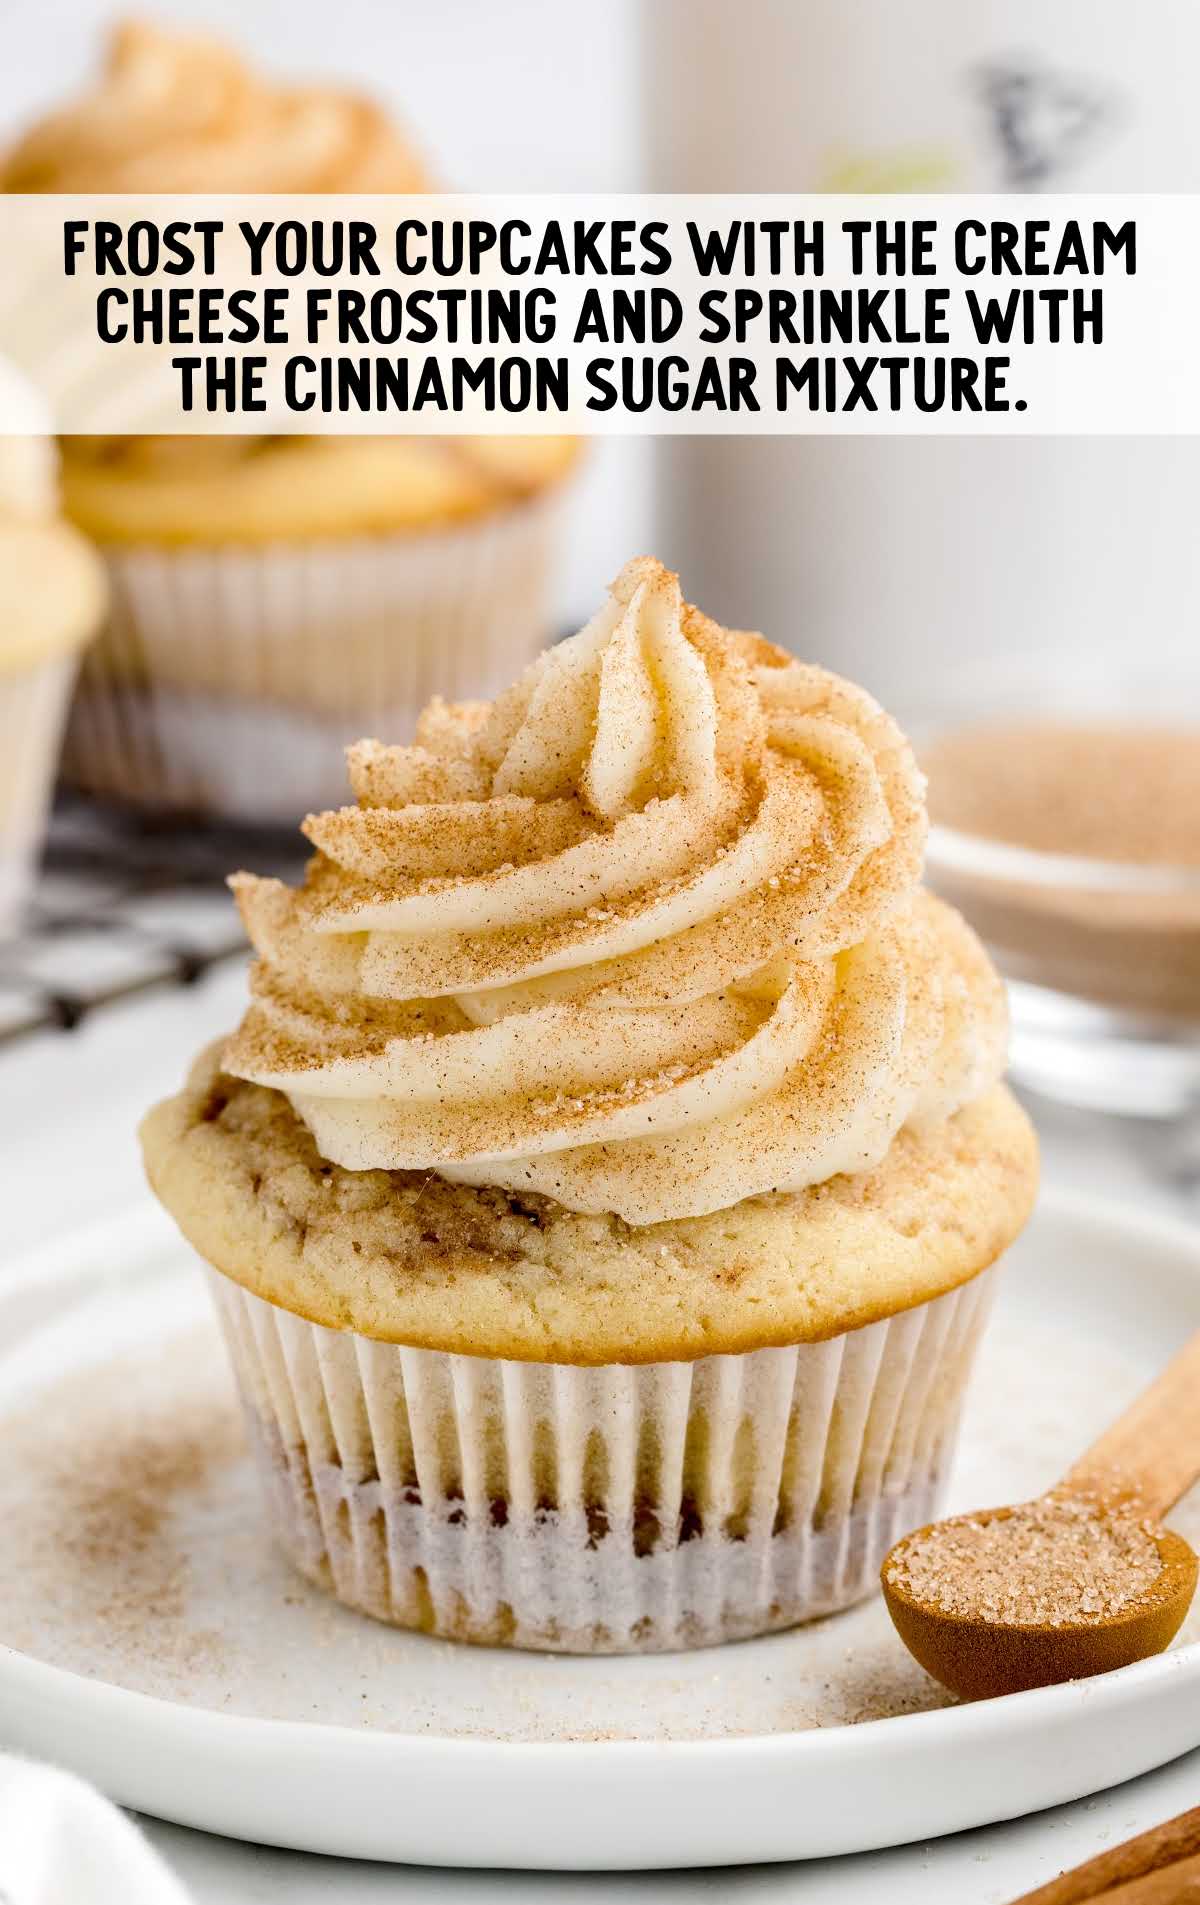 cream cheese and cinnamon sugar mixture topped on top of the cupcake